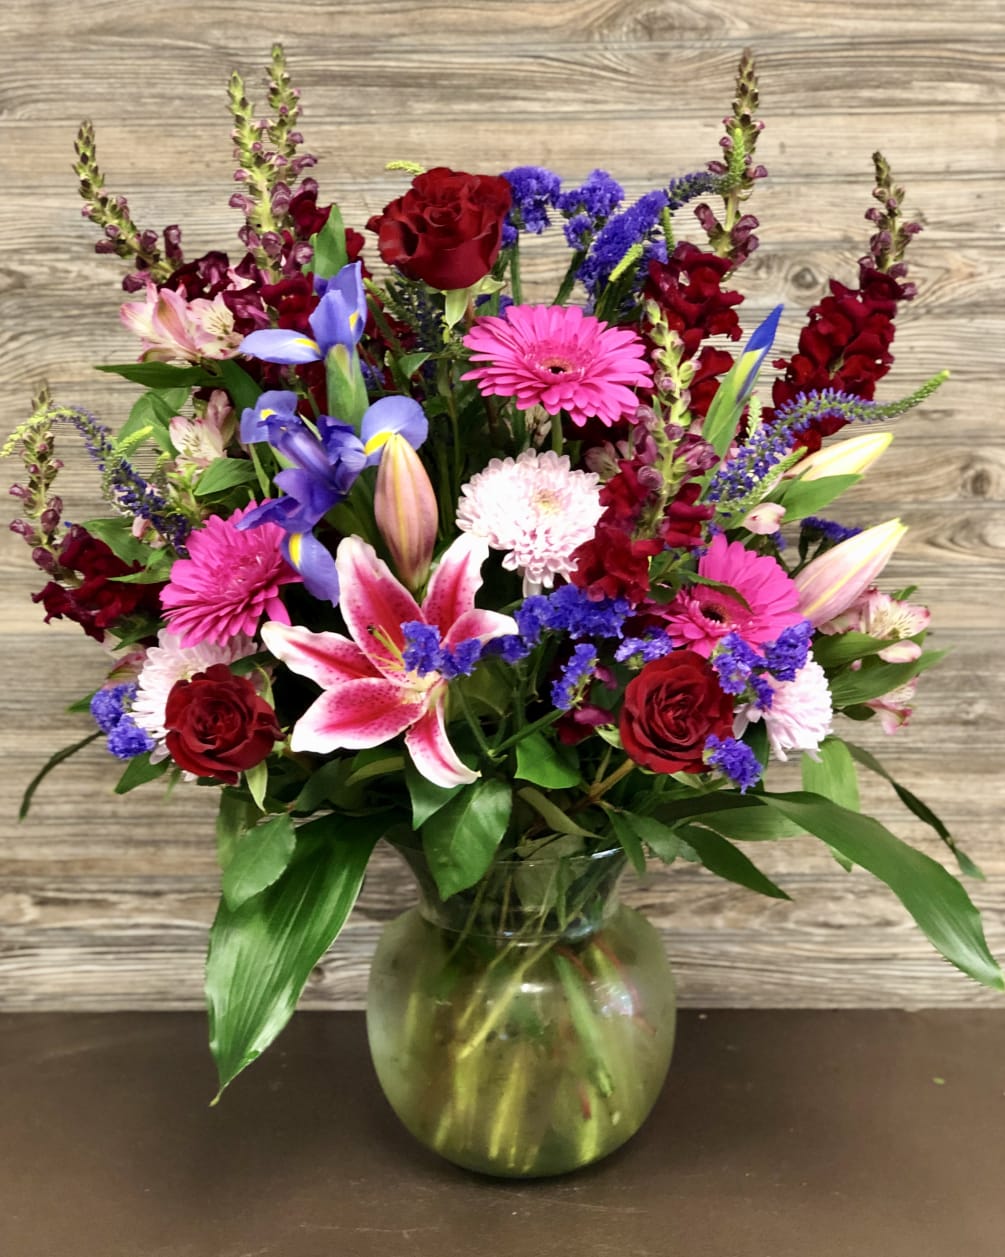 Assorted mixed seasonal flowers like lilies, roses, gerberas, iris, and snapdragons accented